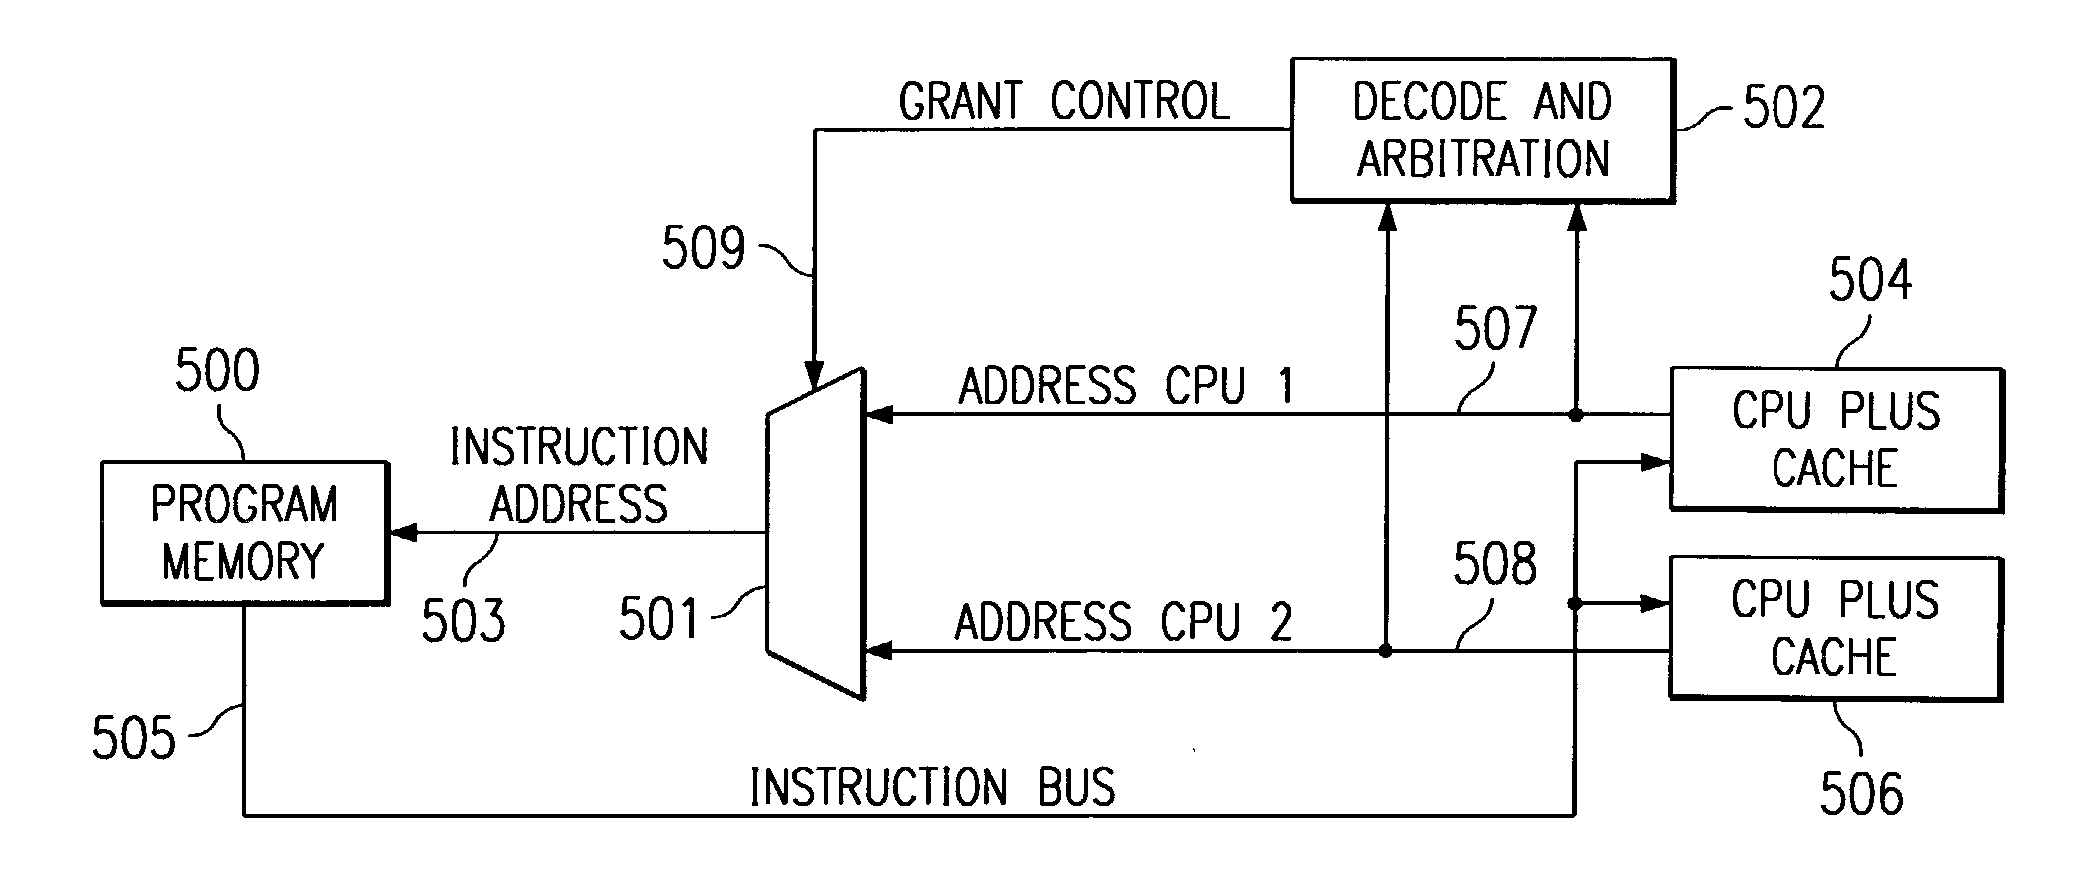 Embedded symmetric multiprocessor system with arbitration control of access to shared resources